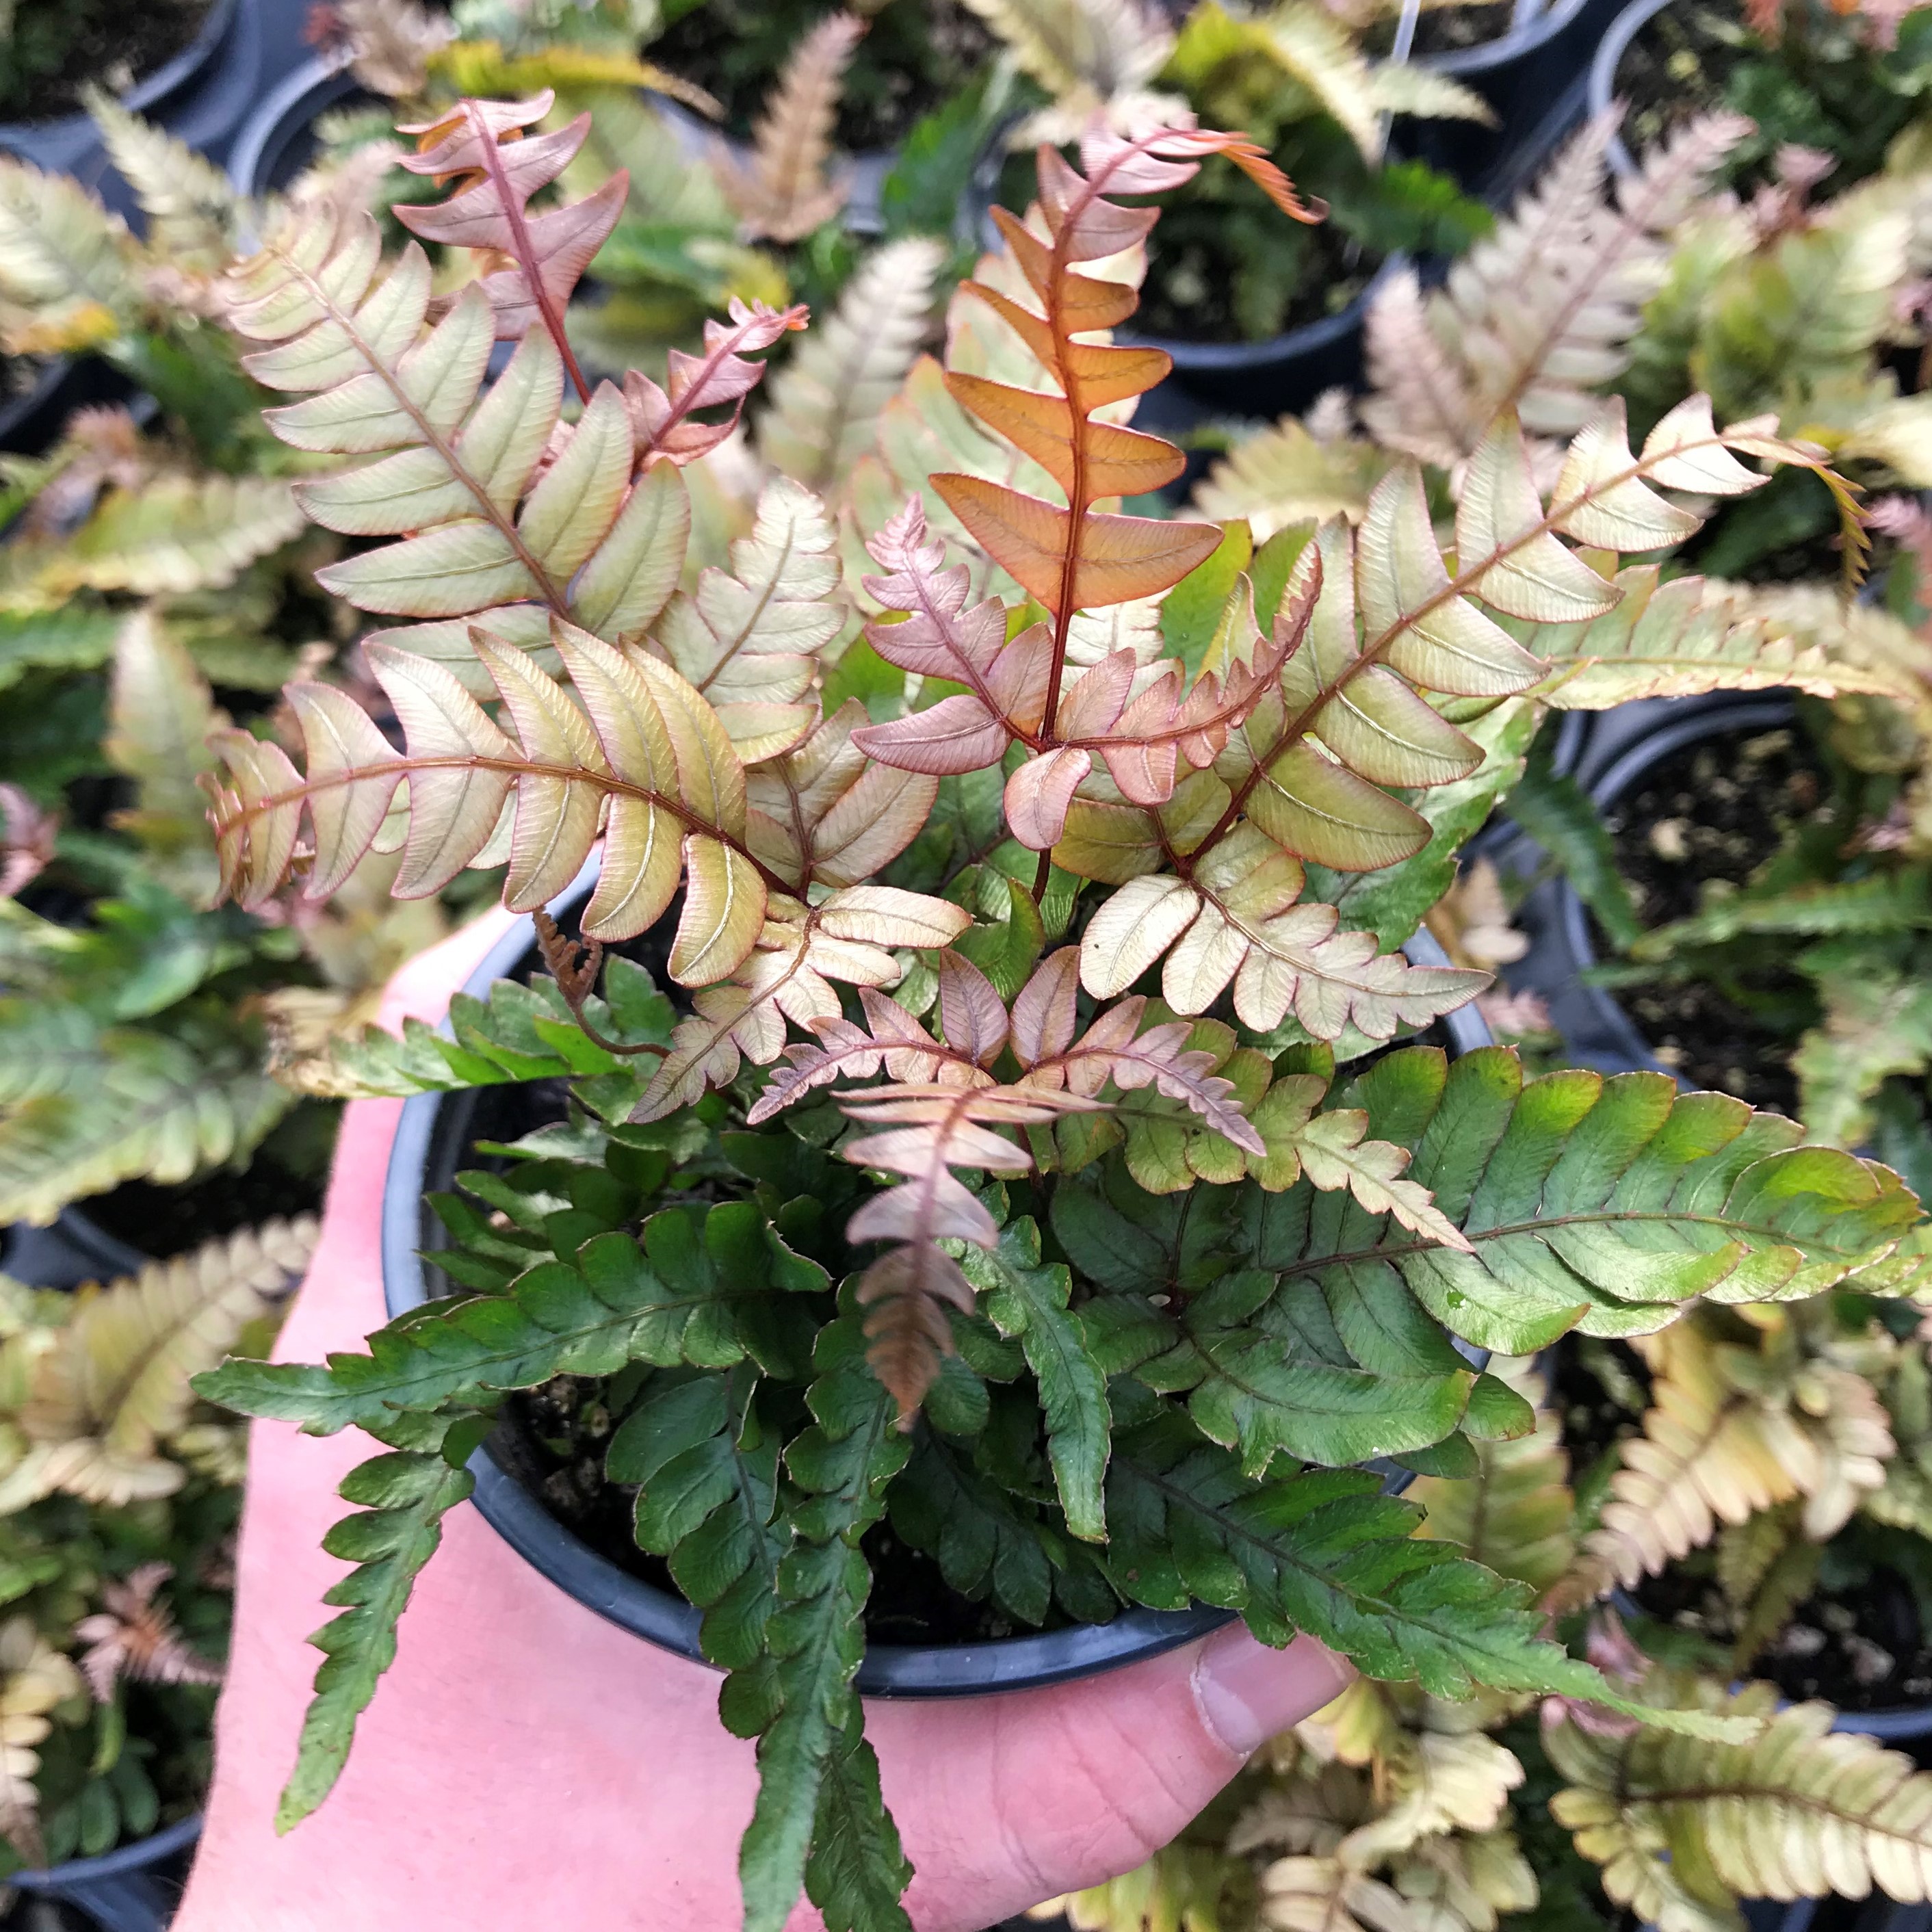 is the tricolor fern evergreen?